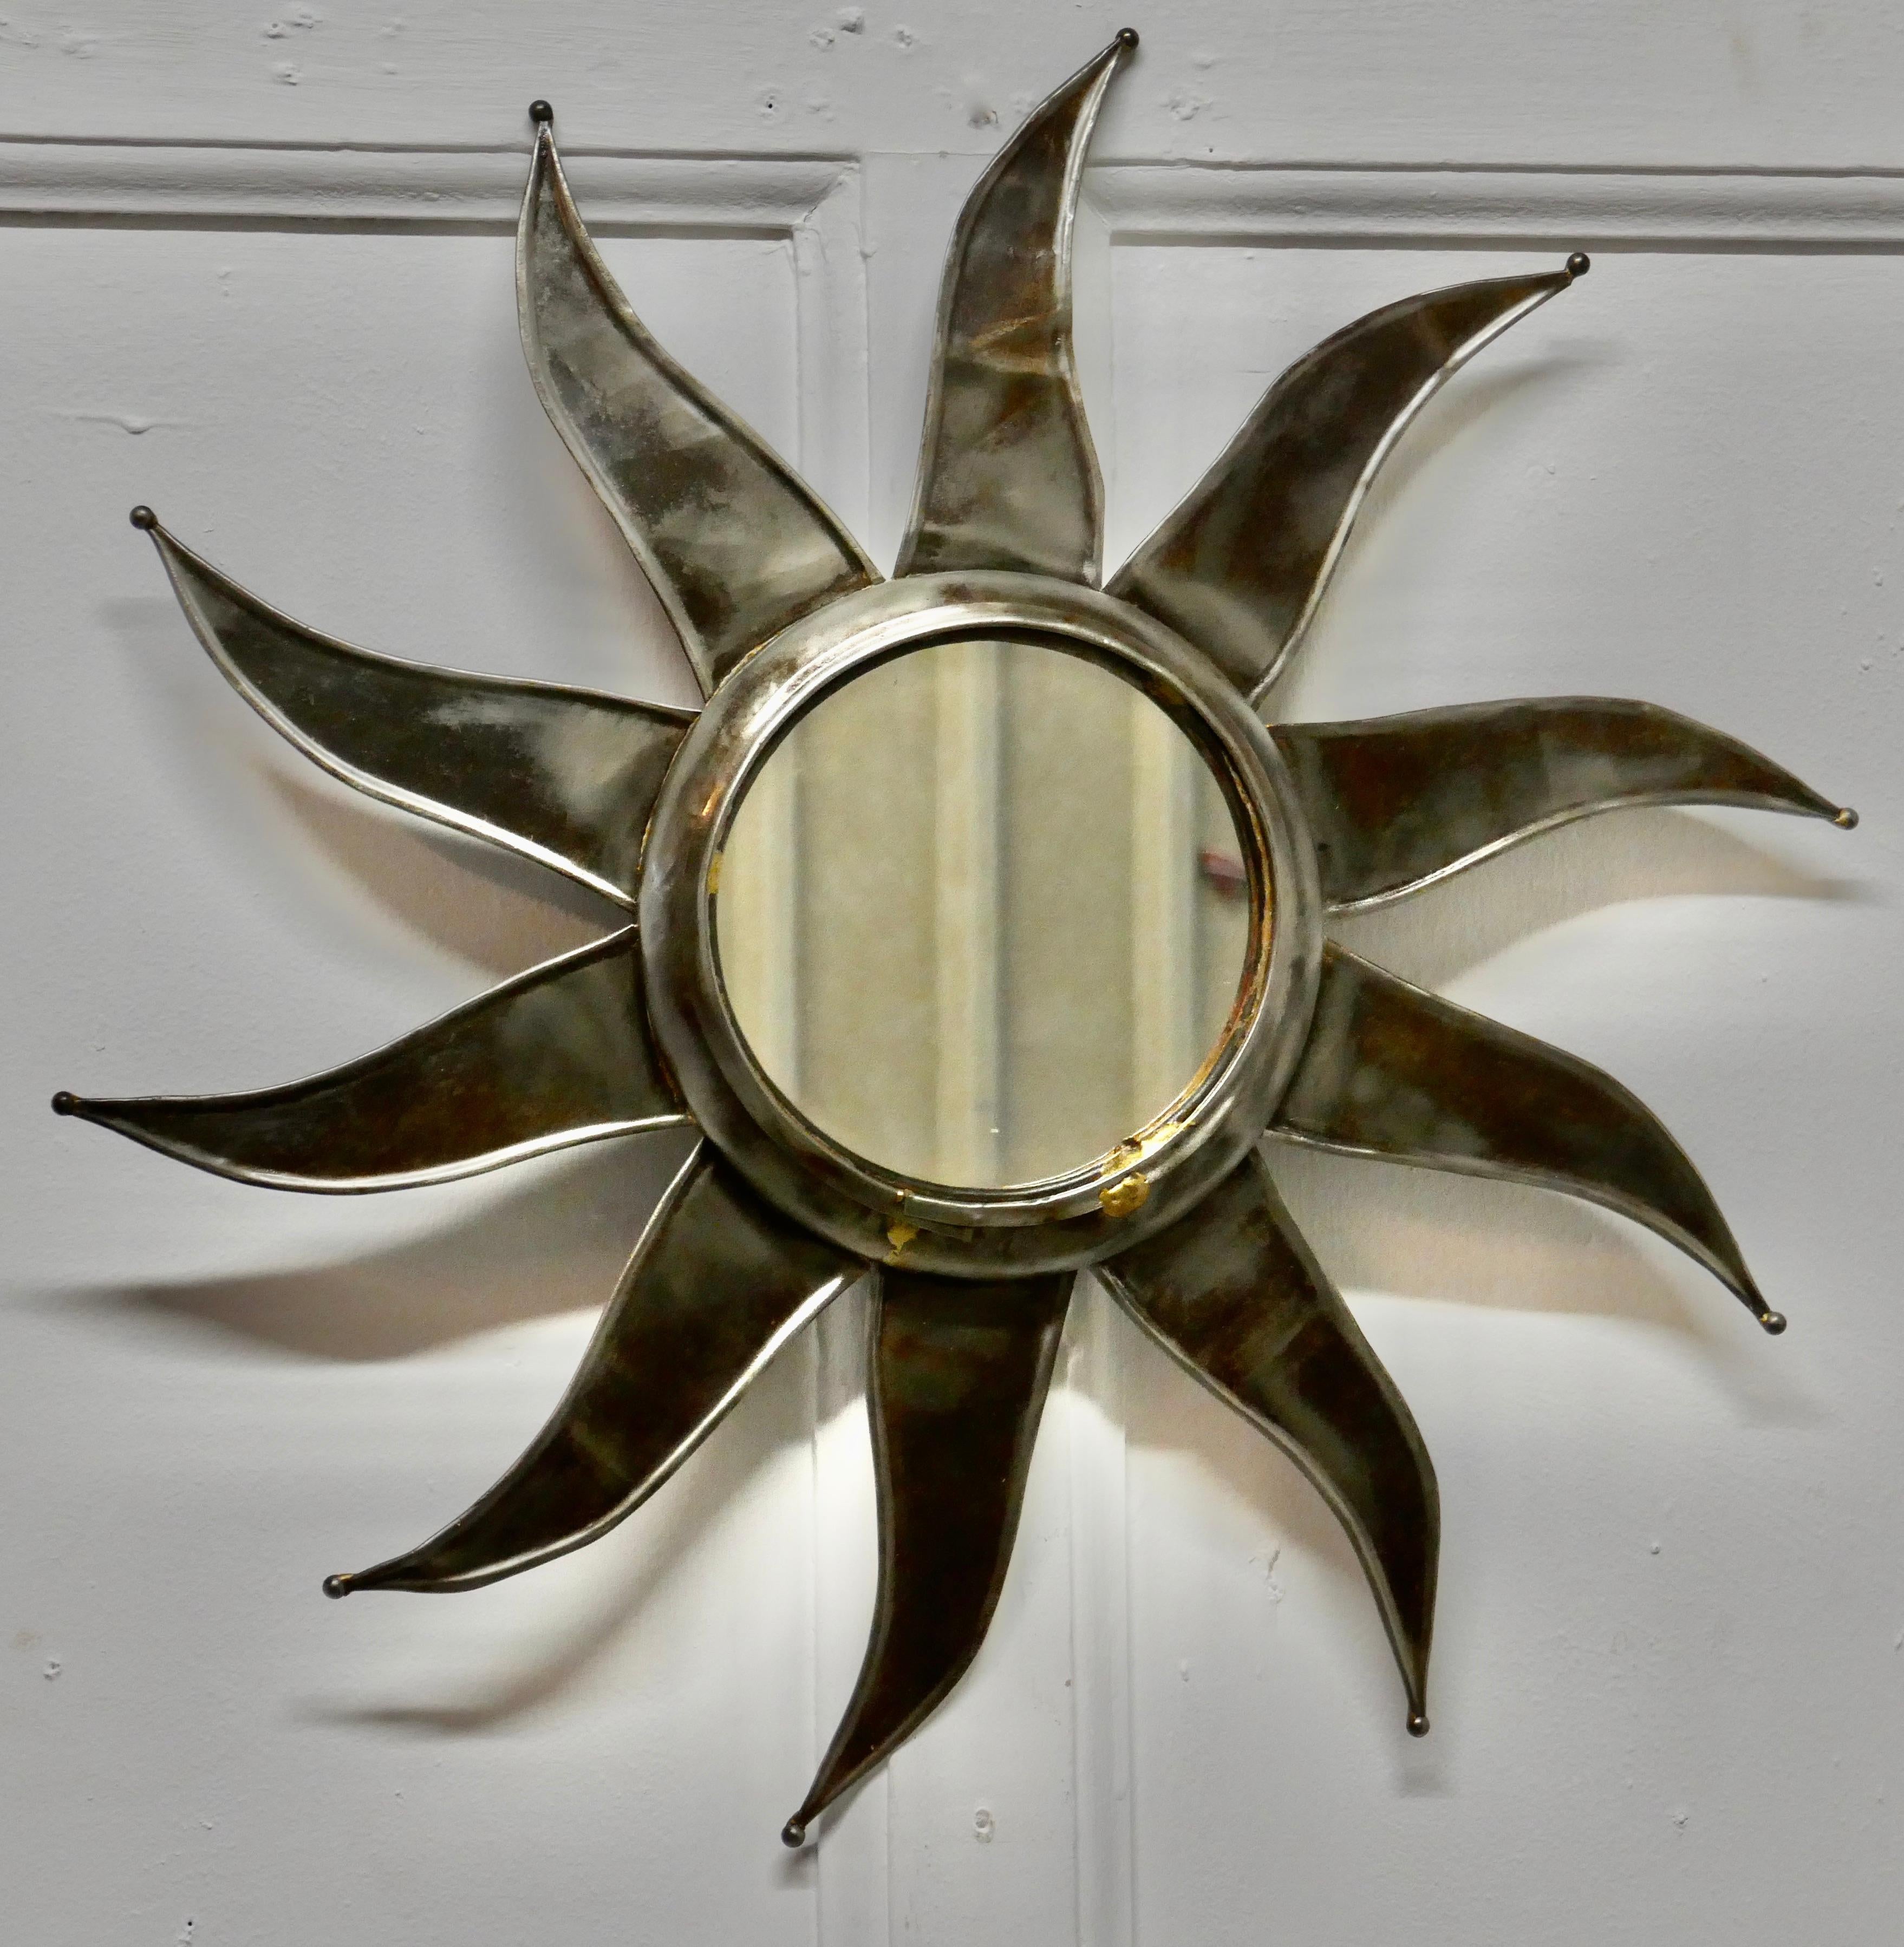 20th Century French Retro Sunburst Industrial Look Polished Steel Mirror For Sale